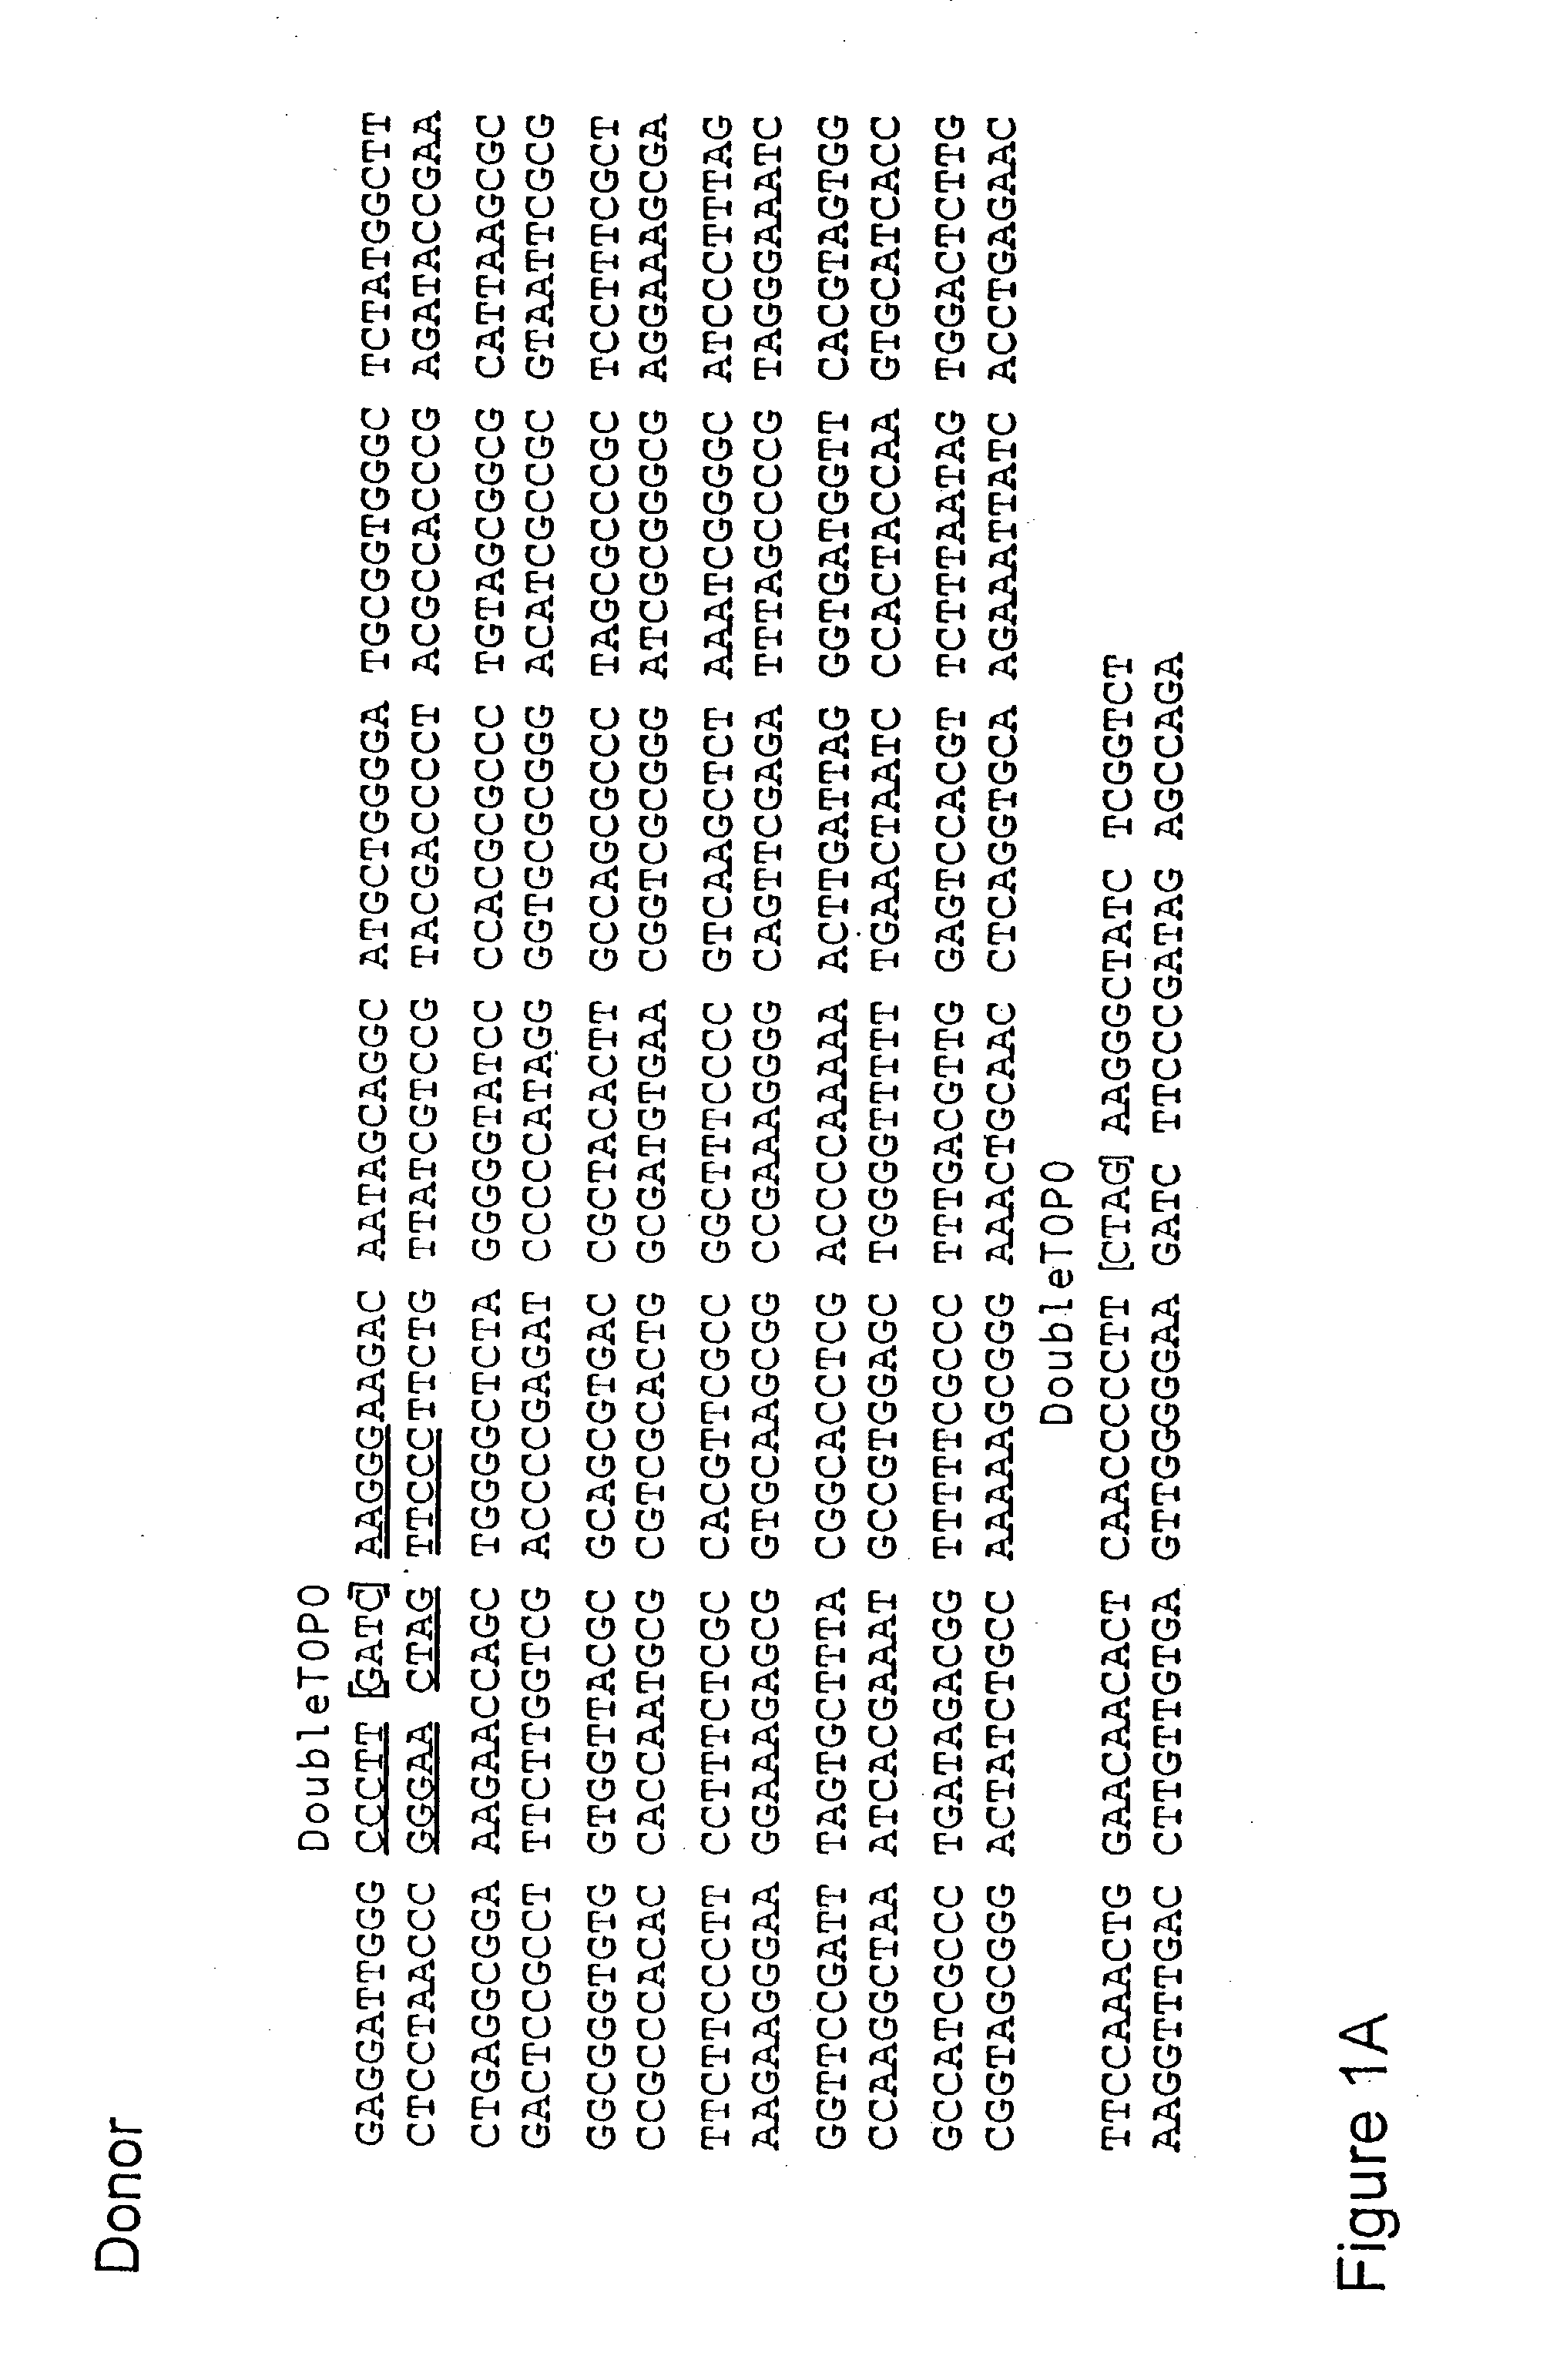 System for the rapid manipulation of nucleic acid sequences